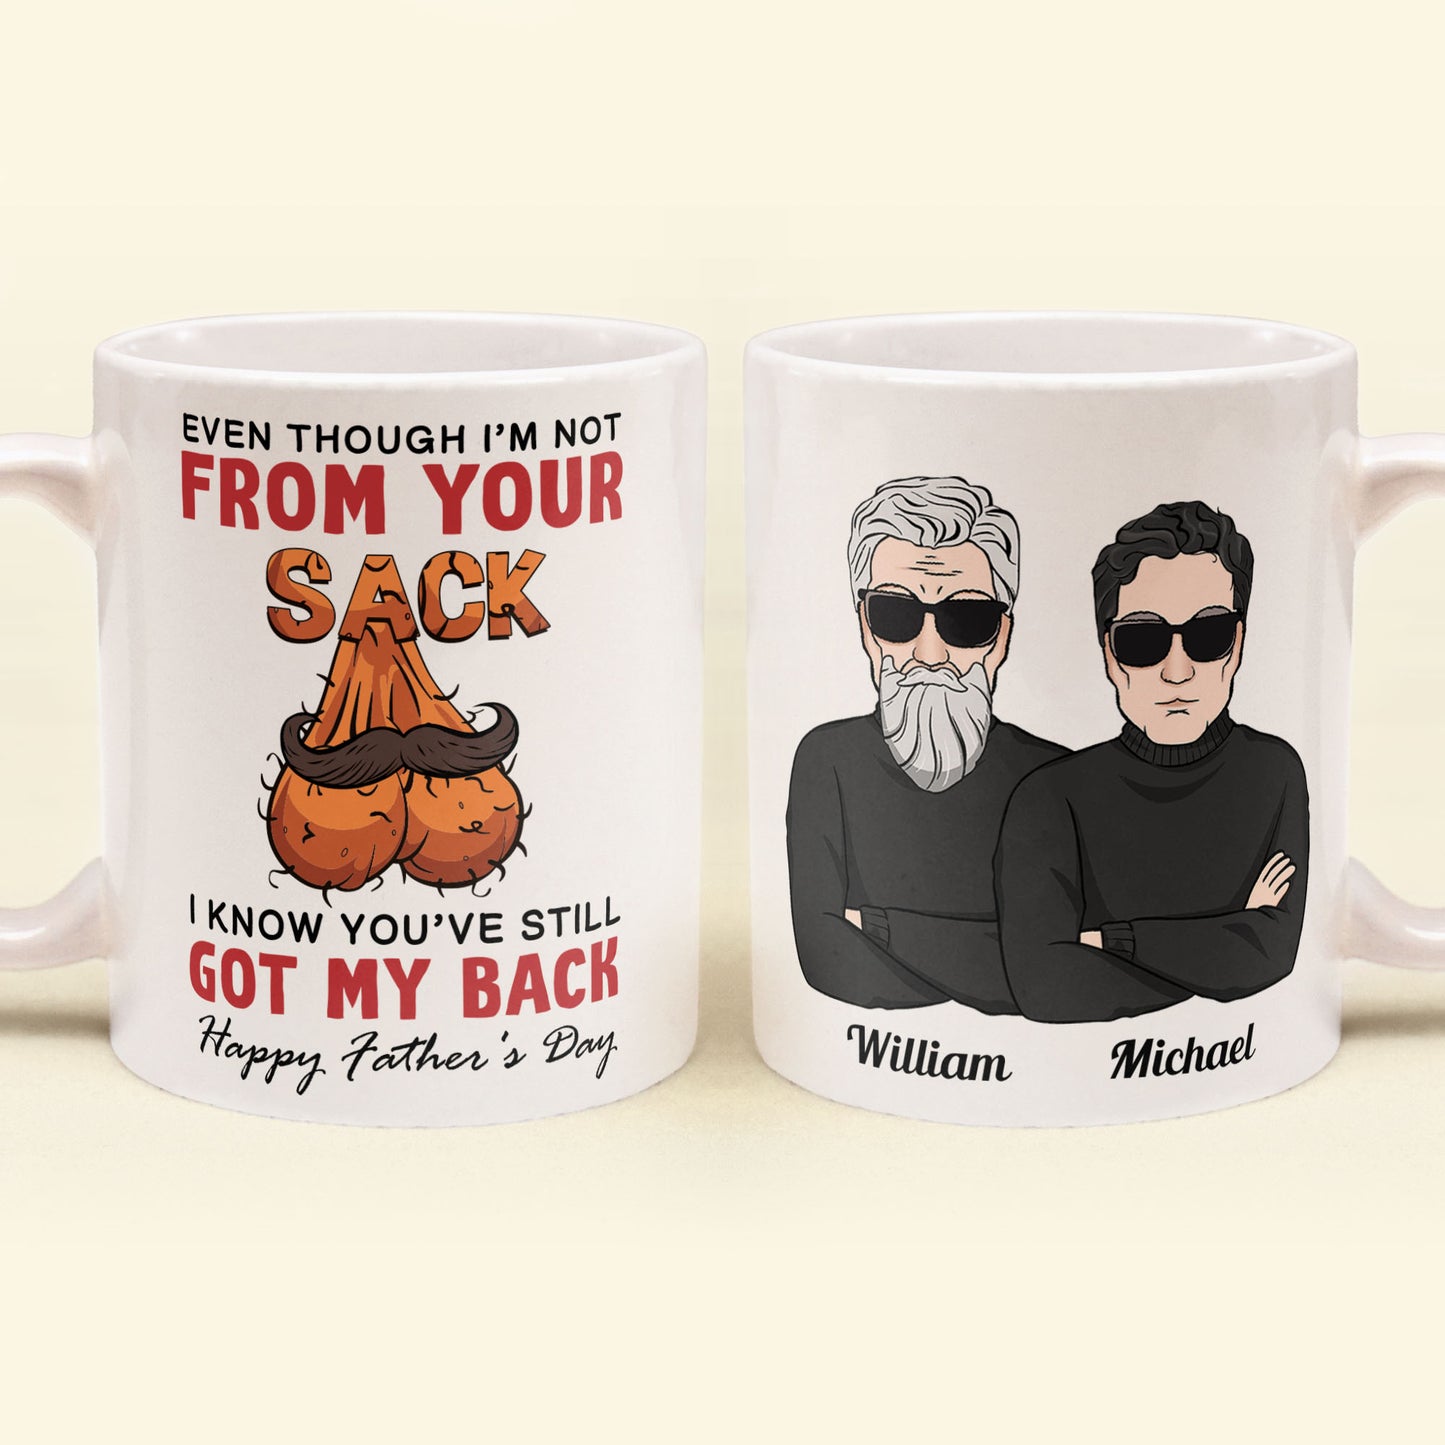 Not From Your Sack - Personalized Mug - Birthday, Christmas, Funny, Father's Day Gift For Bonus Dad, Step Dad, Dad, Father, Papa